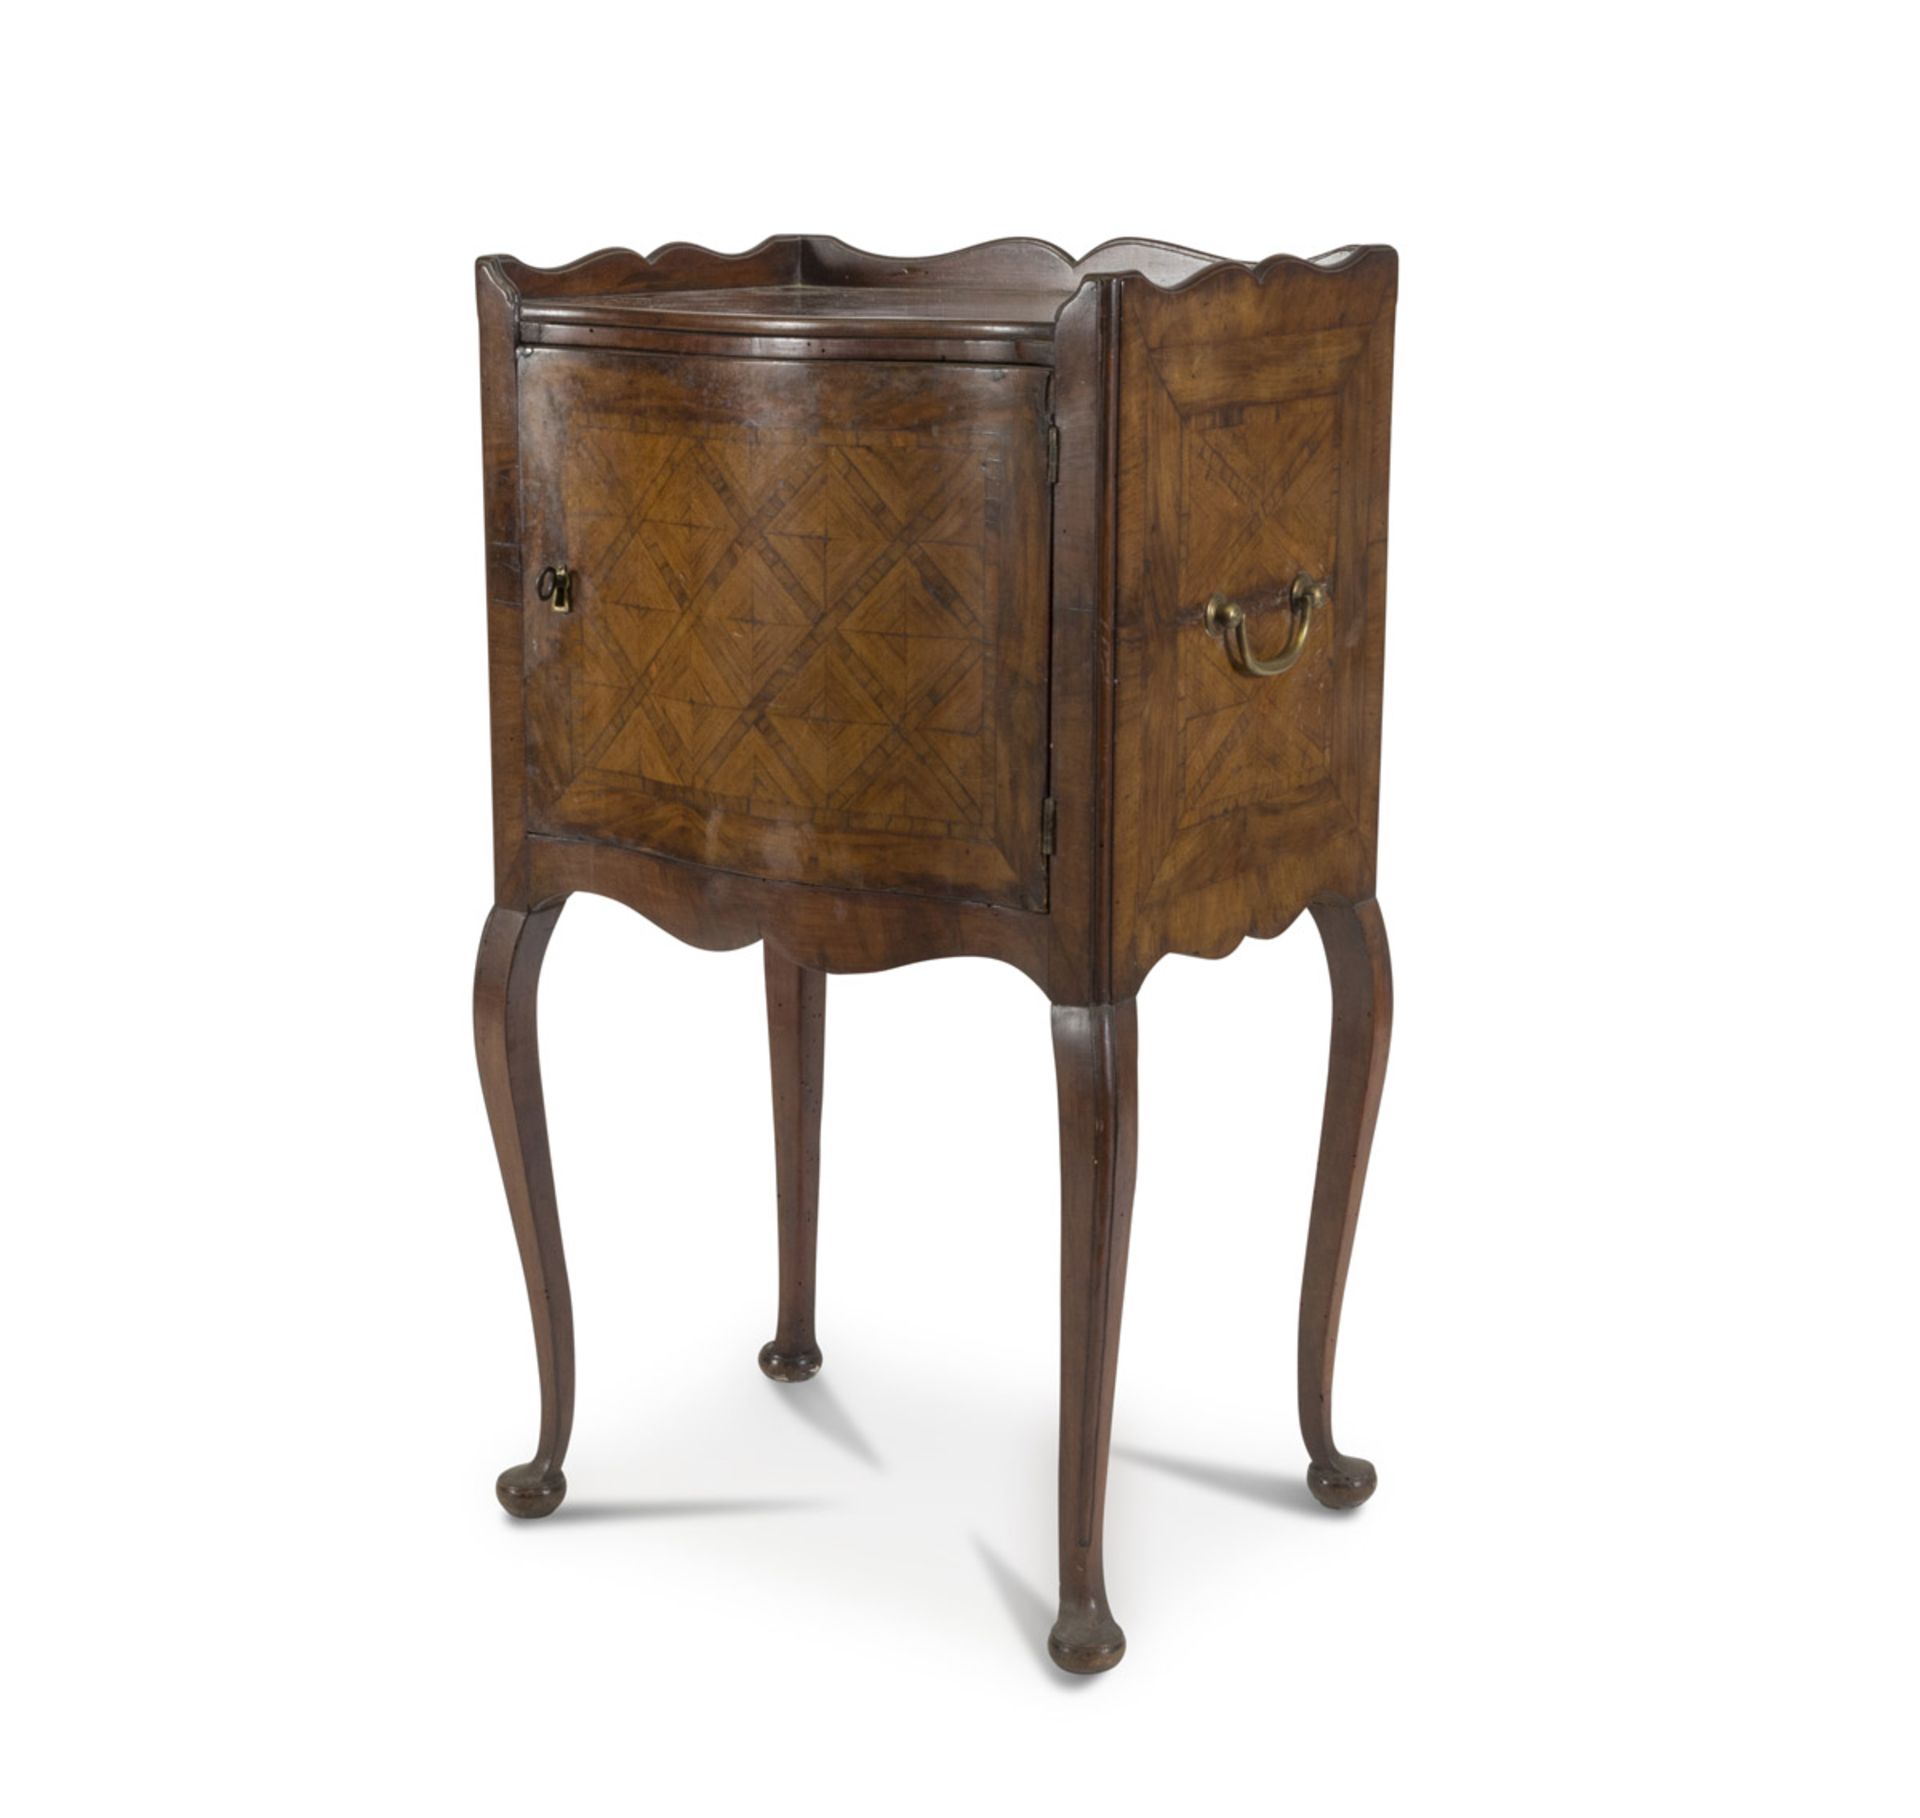 BEDSIDE IN VIOLET WOOD, GENOA 19TH CENTURY with one door on the inlaid front to grid in rosewood.